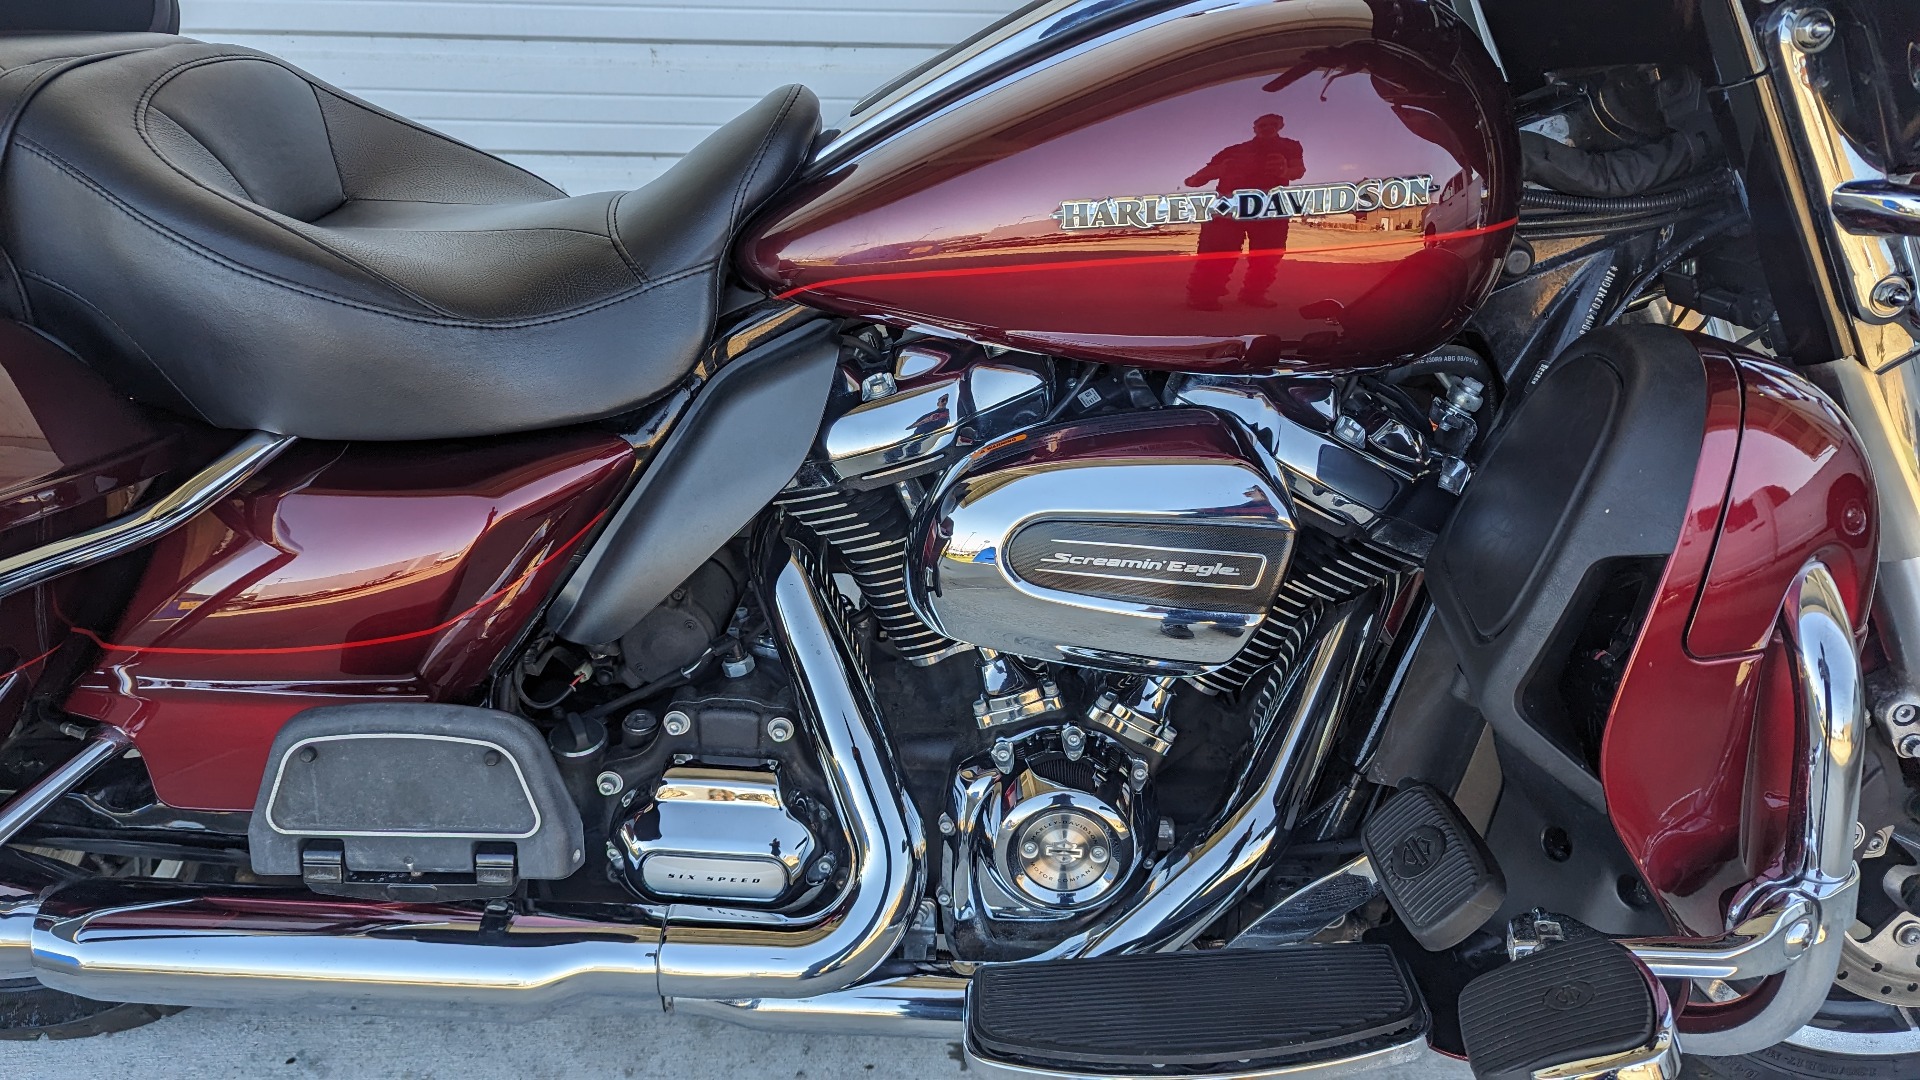 2017 harley davidson ultra limited for sale in texas - Photo 4